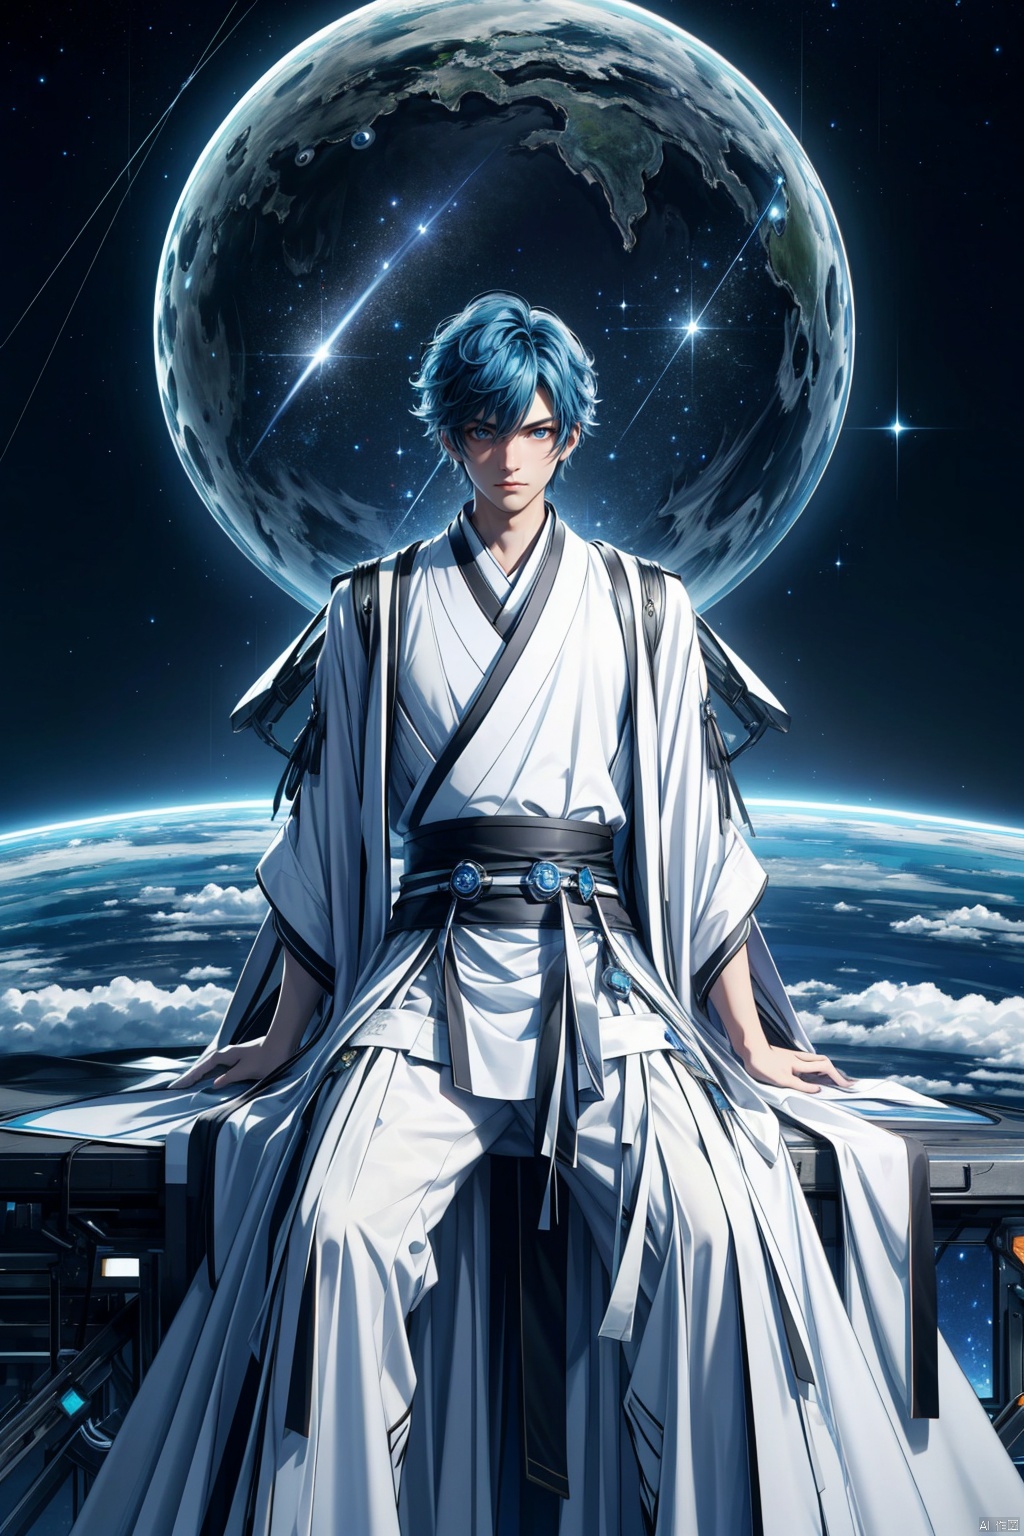  (8k, original photo, best quality, masterpiece: 1.2),1 boy. Blue hair, white and black Hanfu, futuristic robe. Sitting on a research platform floating in the middle of the asteroid belt. A floating meteorite, he was studying with a notebook, surrounded by several asteroids shining with blazing halos. Dramatic lights from distant stars and planets illuminated the scene, casting deep shadows on the Hanfu. The boy looks confident and determined, looking at the vast and mysterious universe with curiosity and respect, with a cowboy lens,Aso

